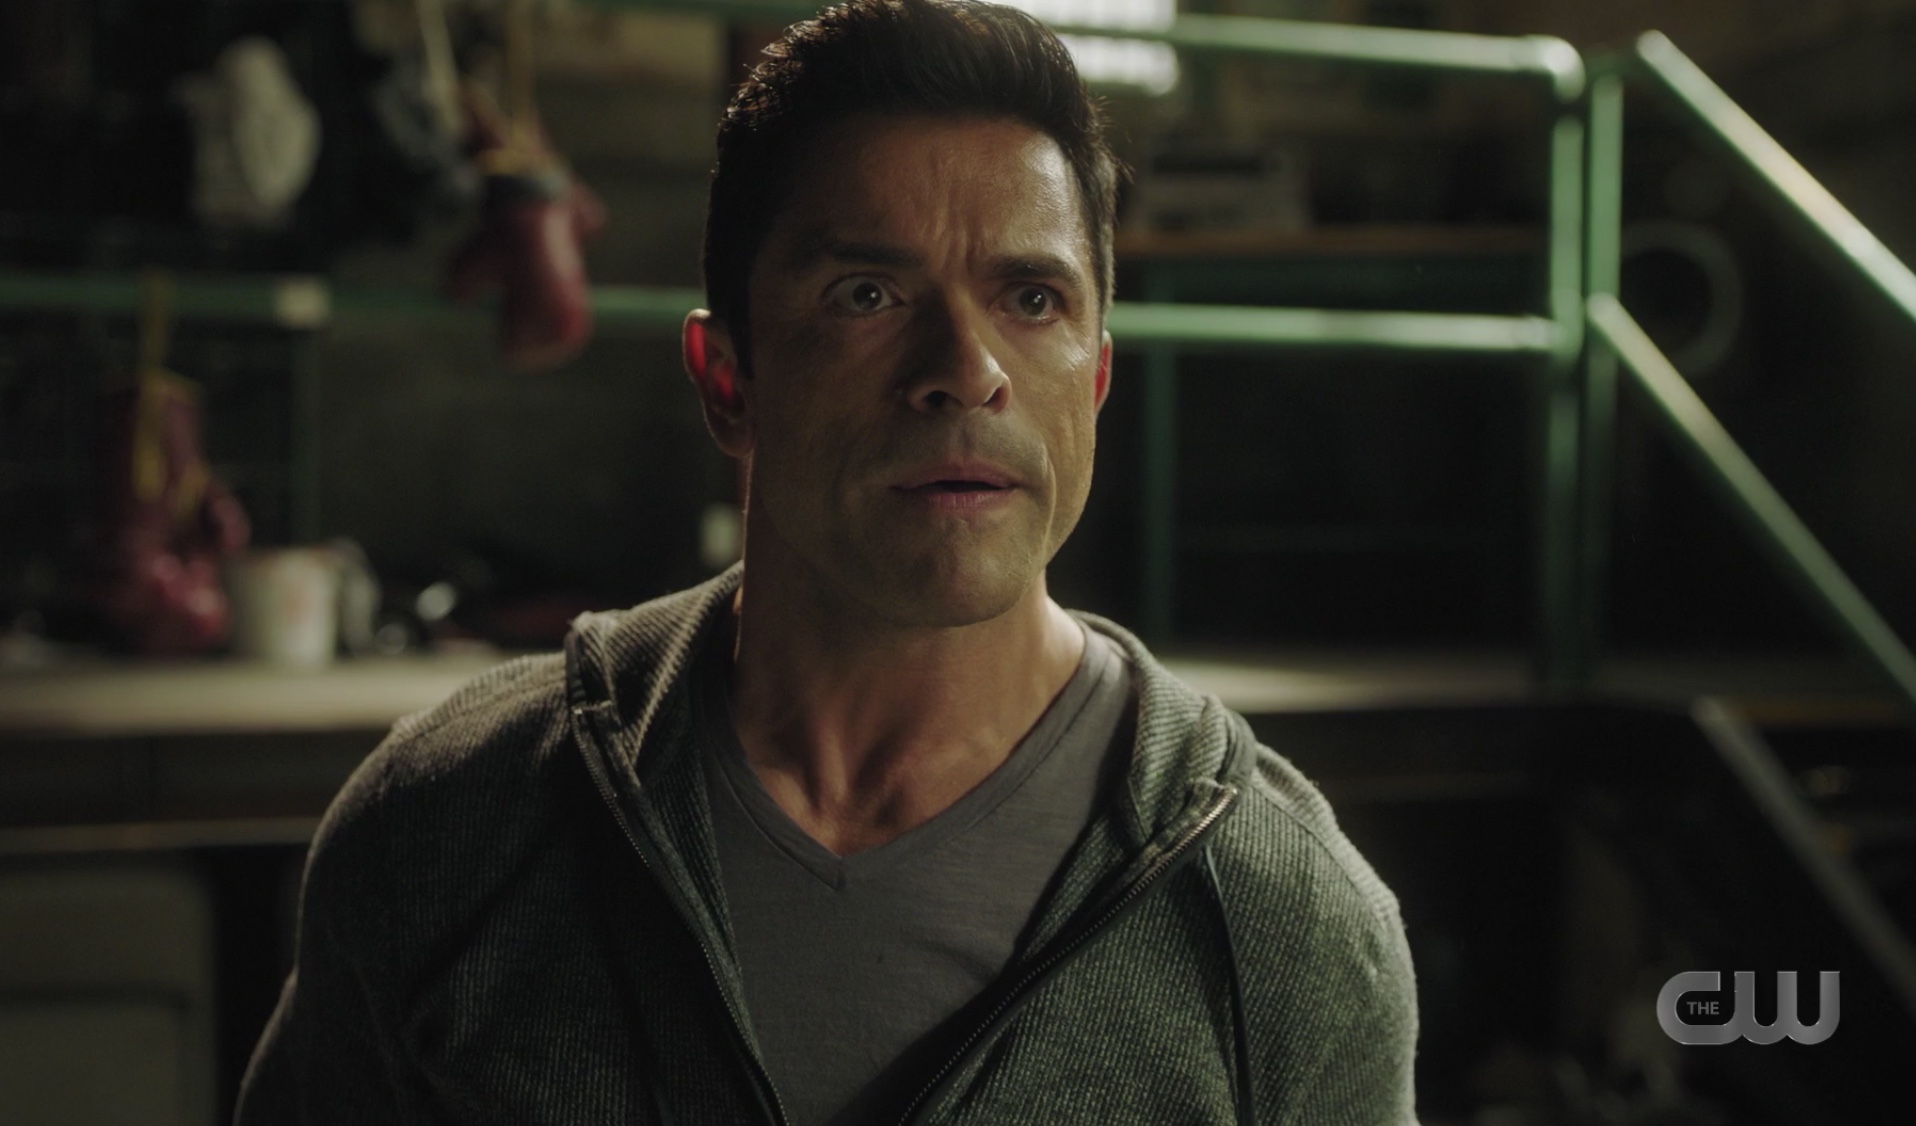 Hiram is ready to box Archie's face on Riverdale